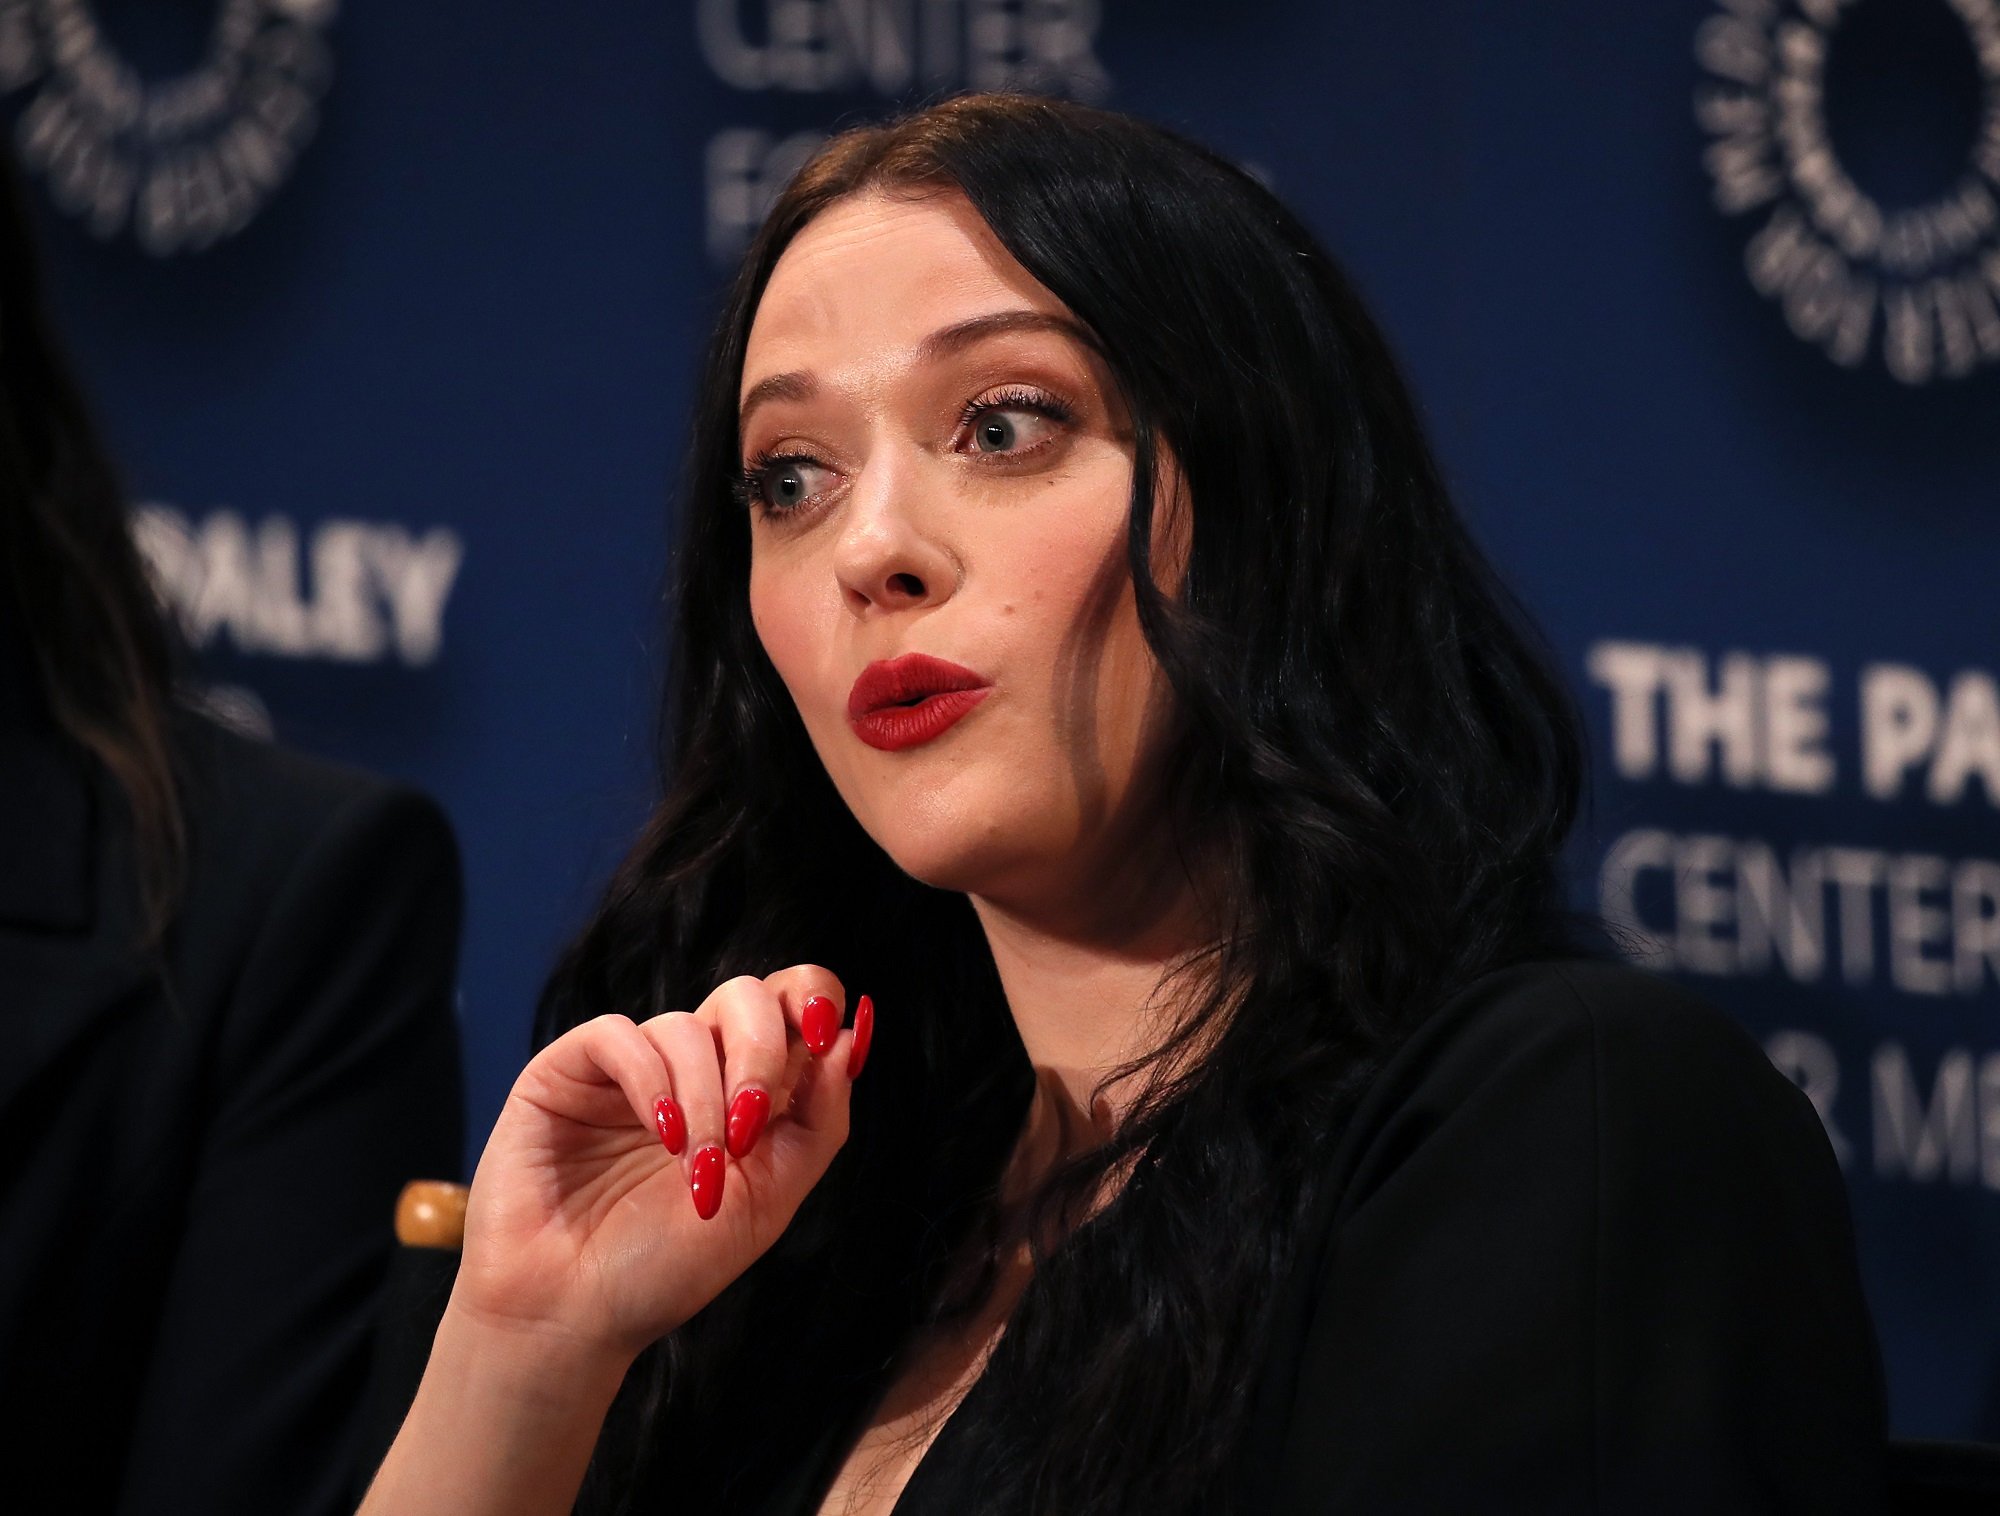 Kat Dennings speaking on stage at The Paley Center for Media's 2019 PaleyFest Fall TV Previews - Hulu